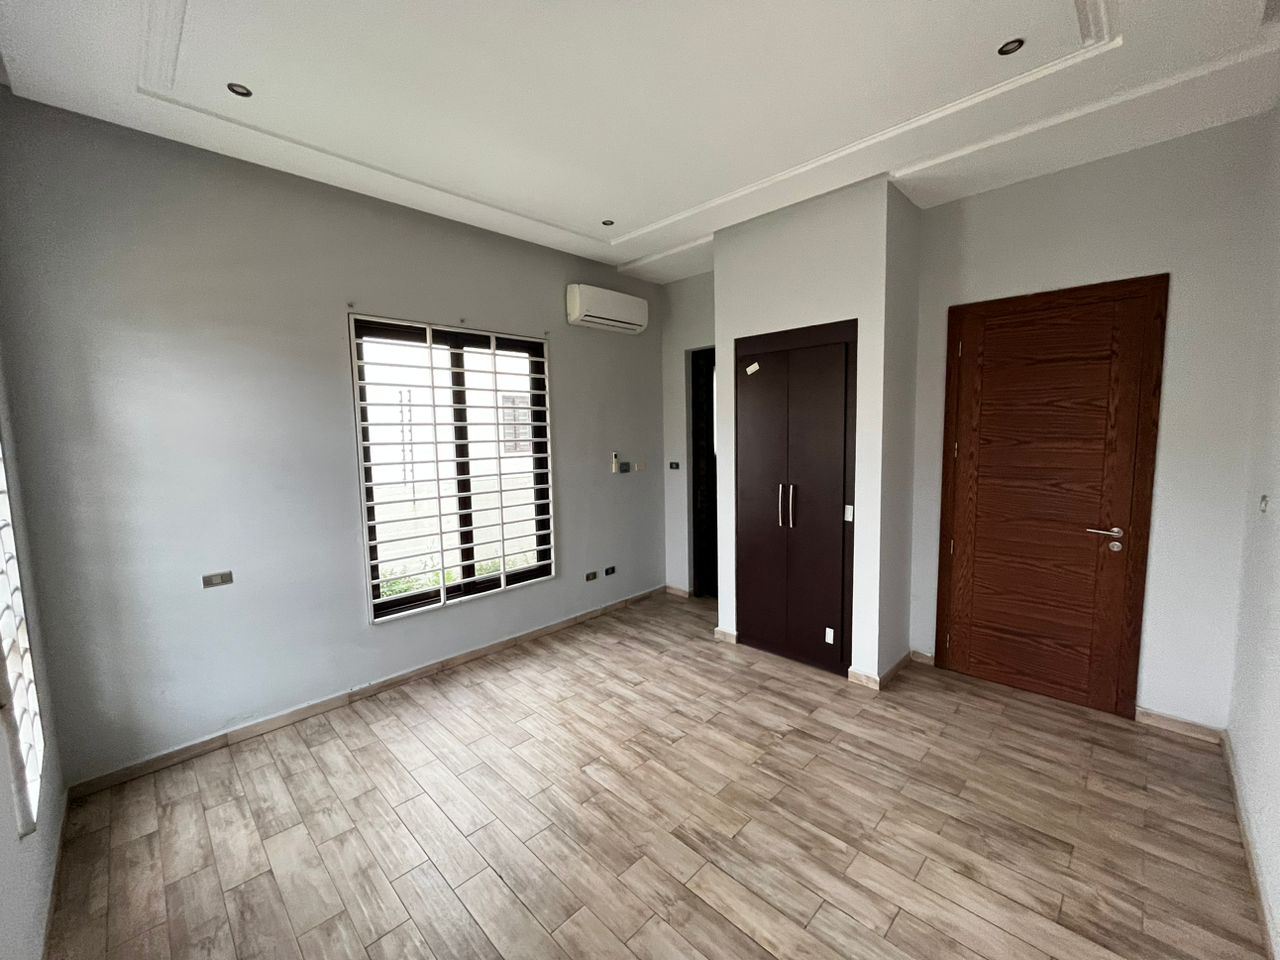 Executive 3-Bedroom Self Compound House with Boys Quarters for Rent at East Legon Adjiringanor